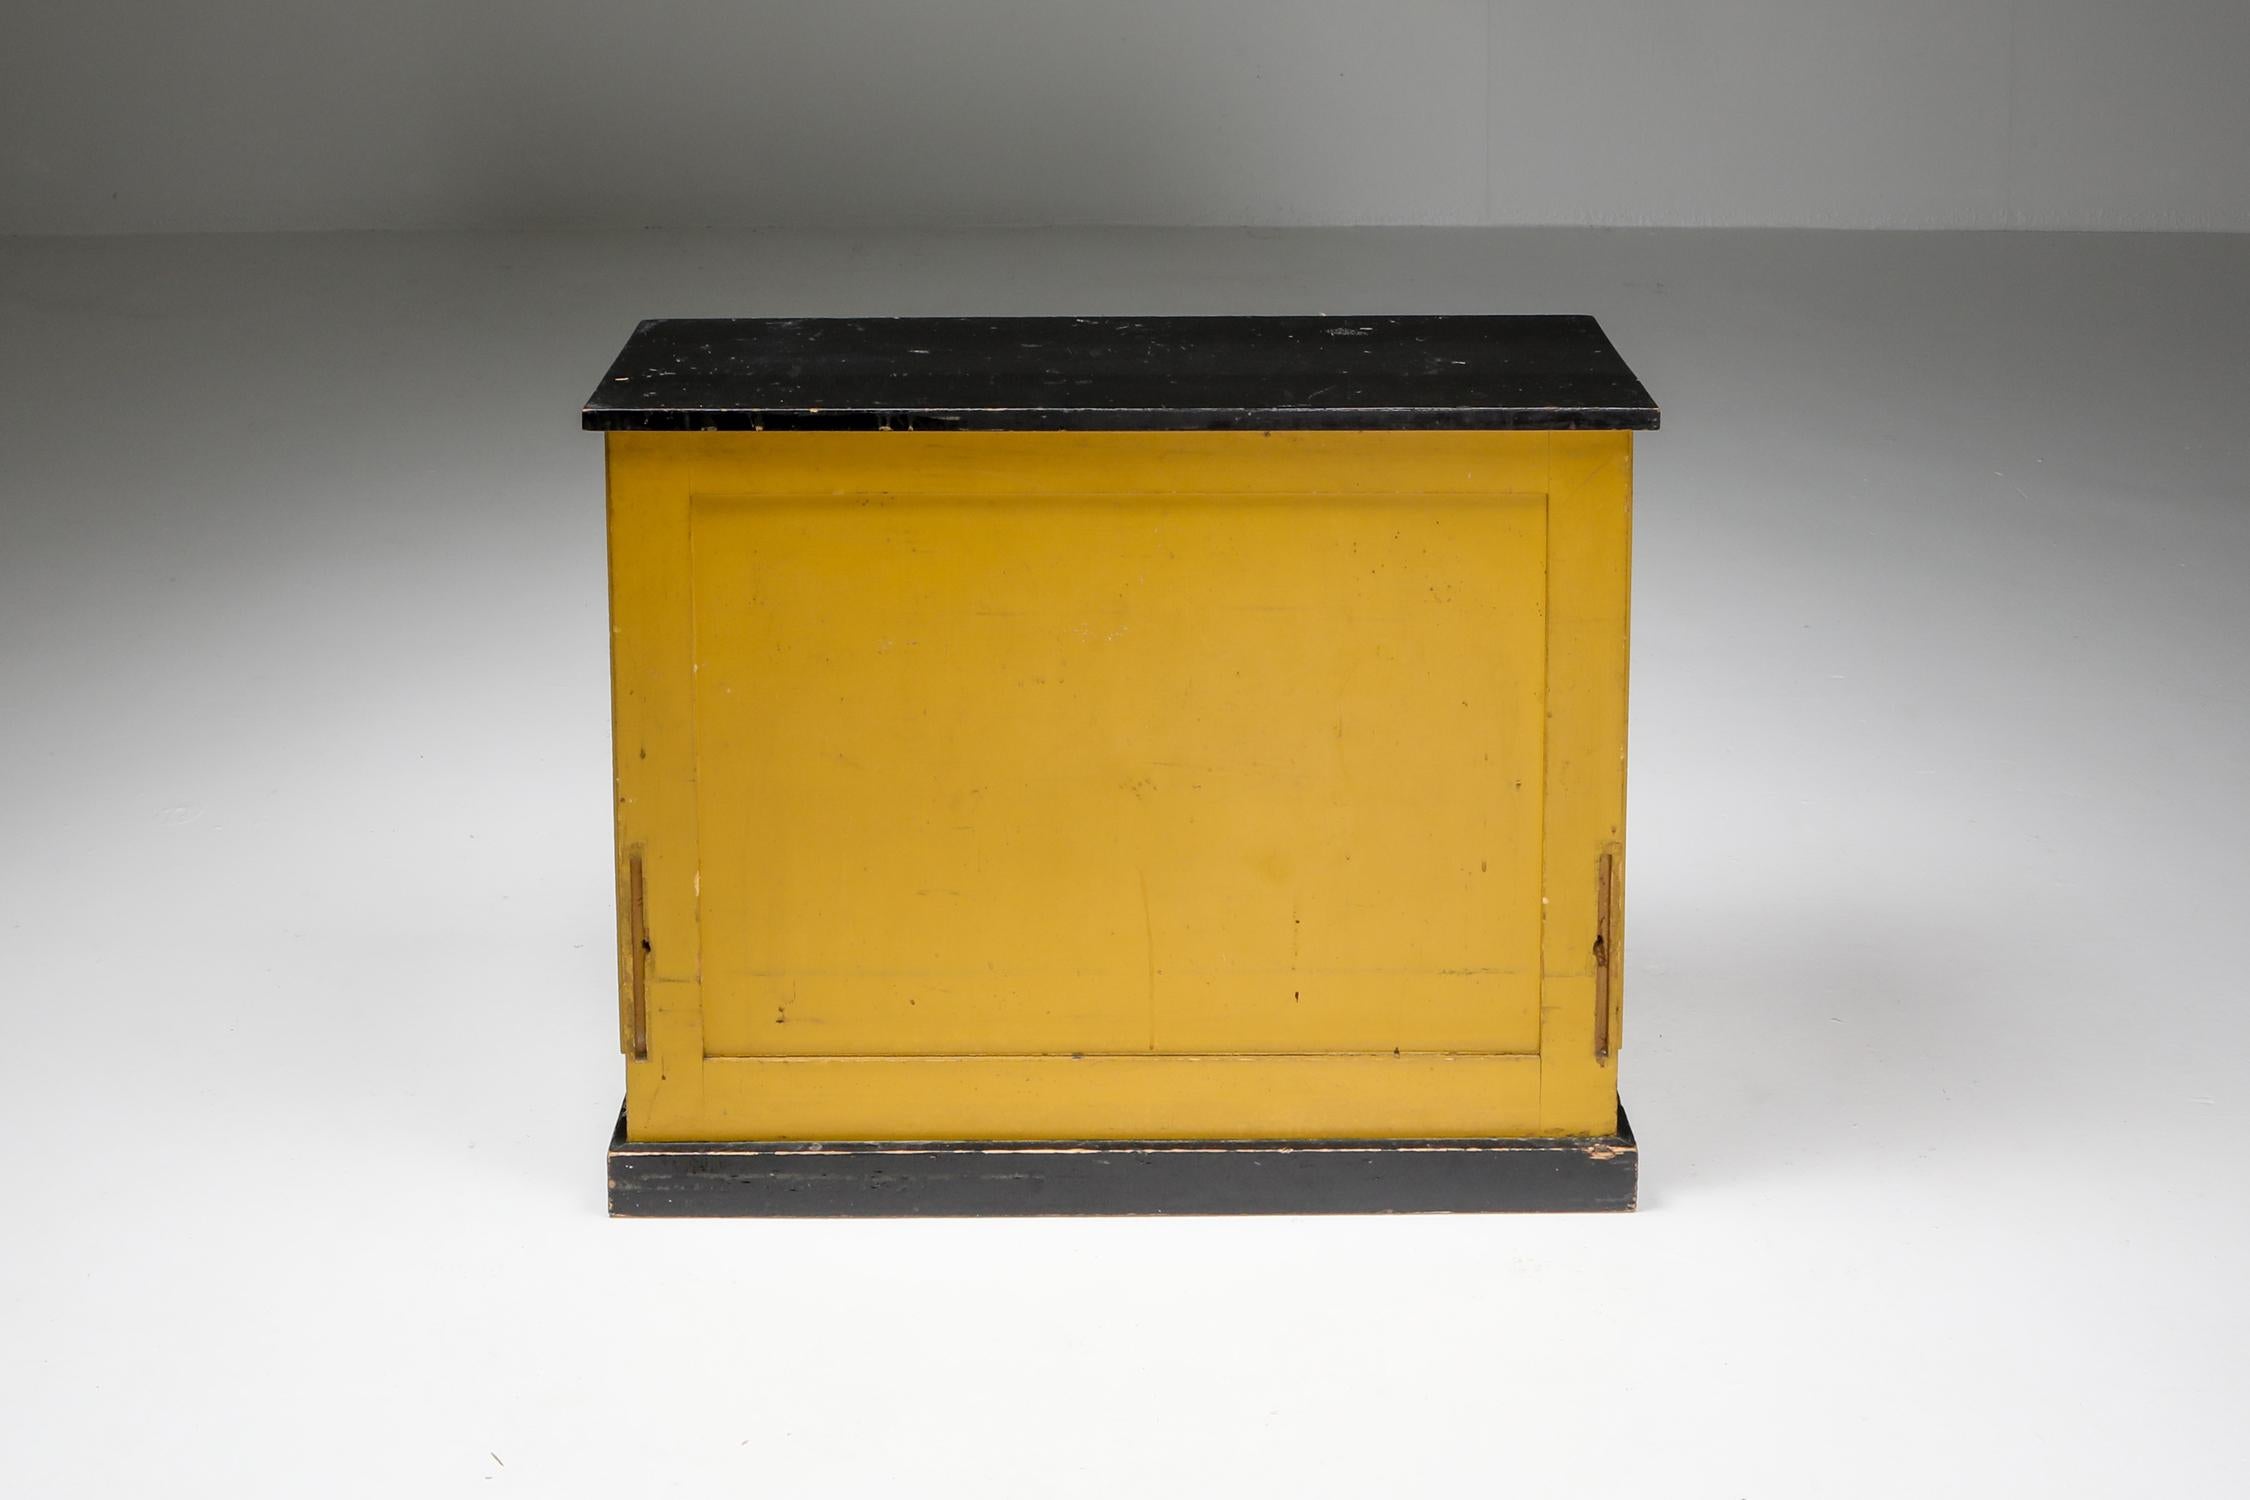 Modernist yellow, black and red shelve unit, Hendrik Wouda, H. Pander & Zonen, Netherlands 1924

Painted pine

The Interbellum, the period between the two World Wars, was a time when culture Dutch blossomed. Architects, designers and artists set